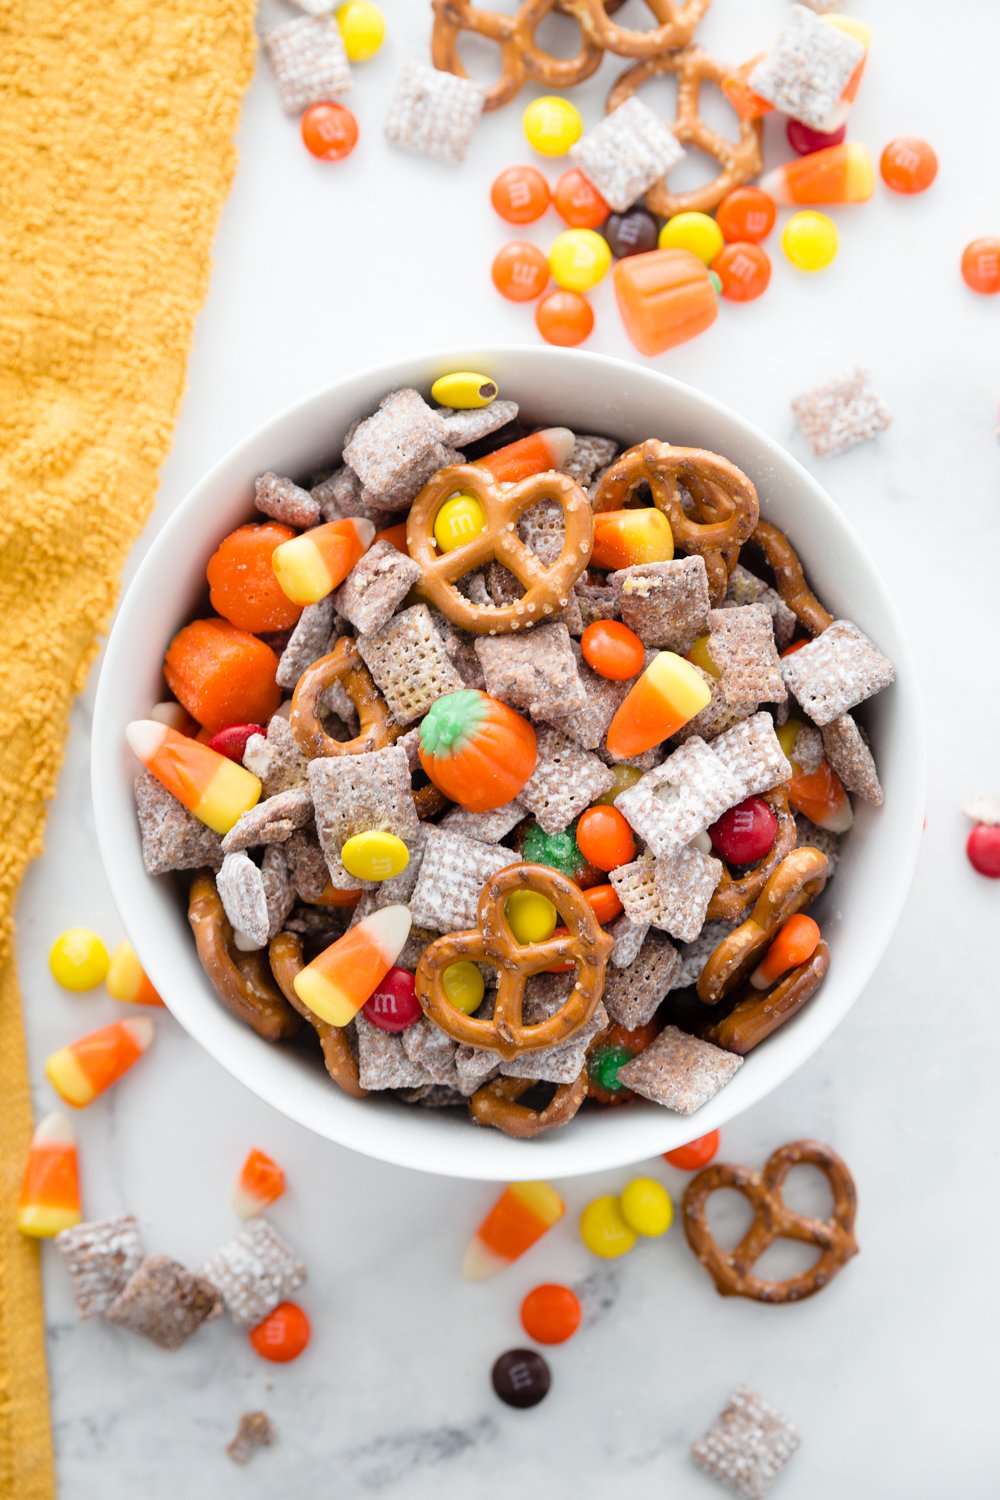 This Harvest Puppy chow is an easy fun fall treat!  It combines the classic flavors of puppy chow with some new ones! 